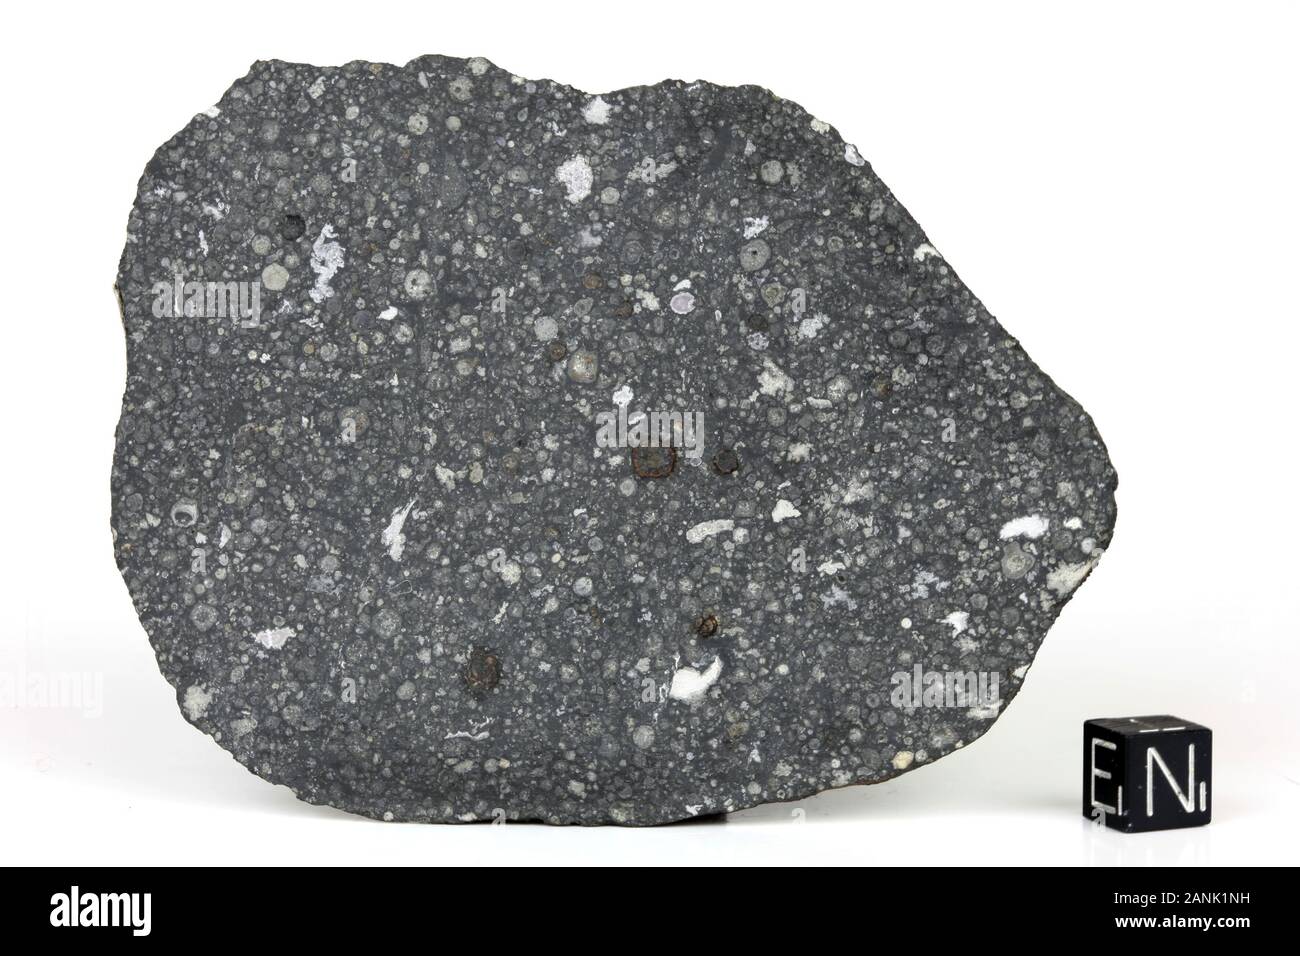 ALLENDE - Fall 8 February 1969, Chihuahua, Mexico. Carbonaceous Chondrite CV3. Total mass 2 tons. Stock Photo